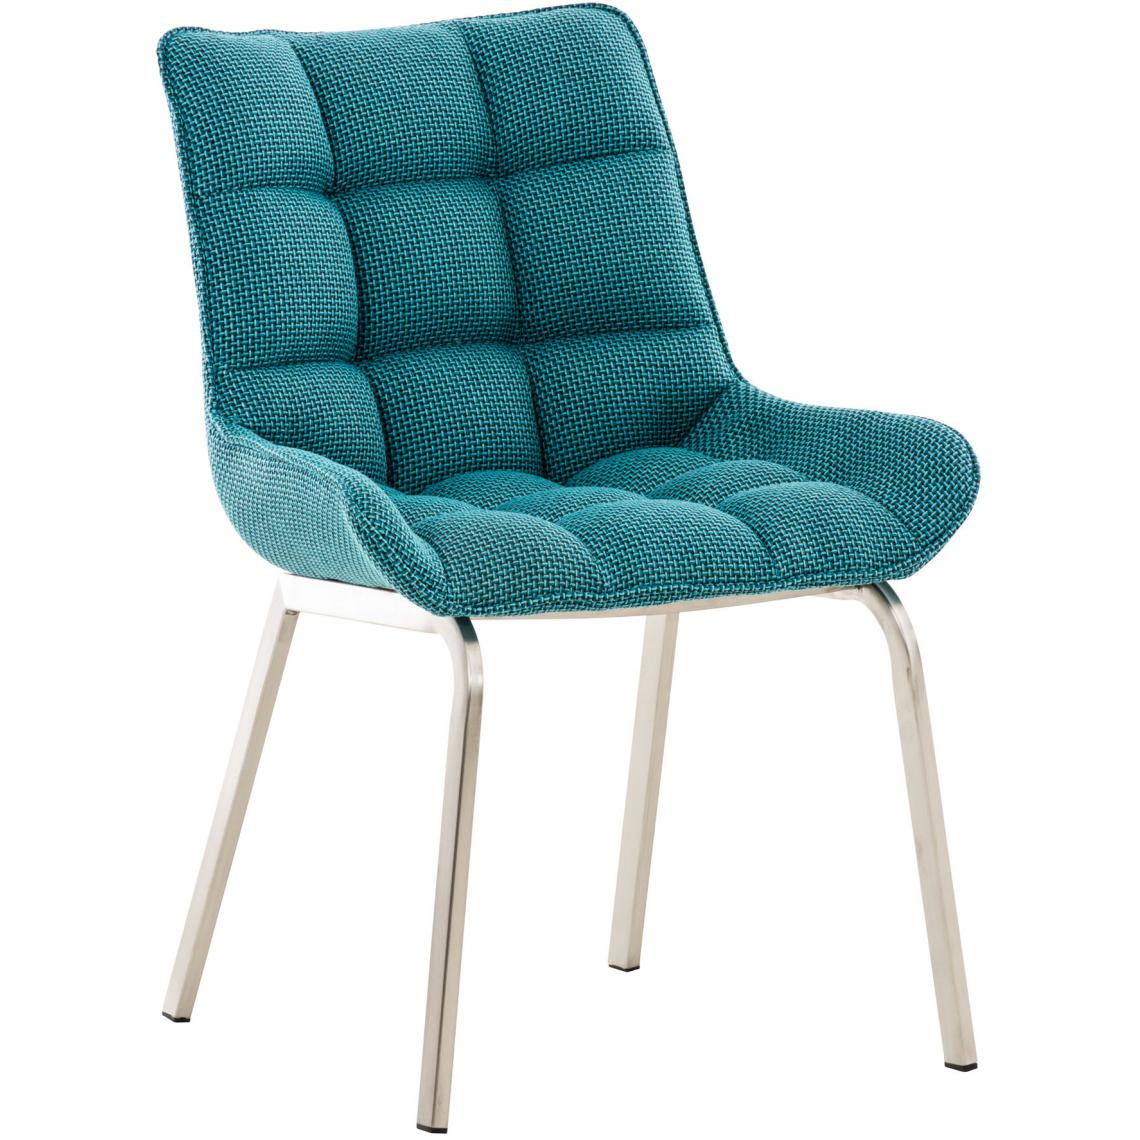 Icaverne - Admirable Chaise tissu gamme Nairobi acier inoxydable couleur turquoise - Chaises